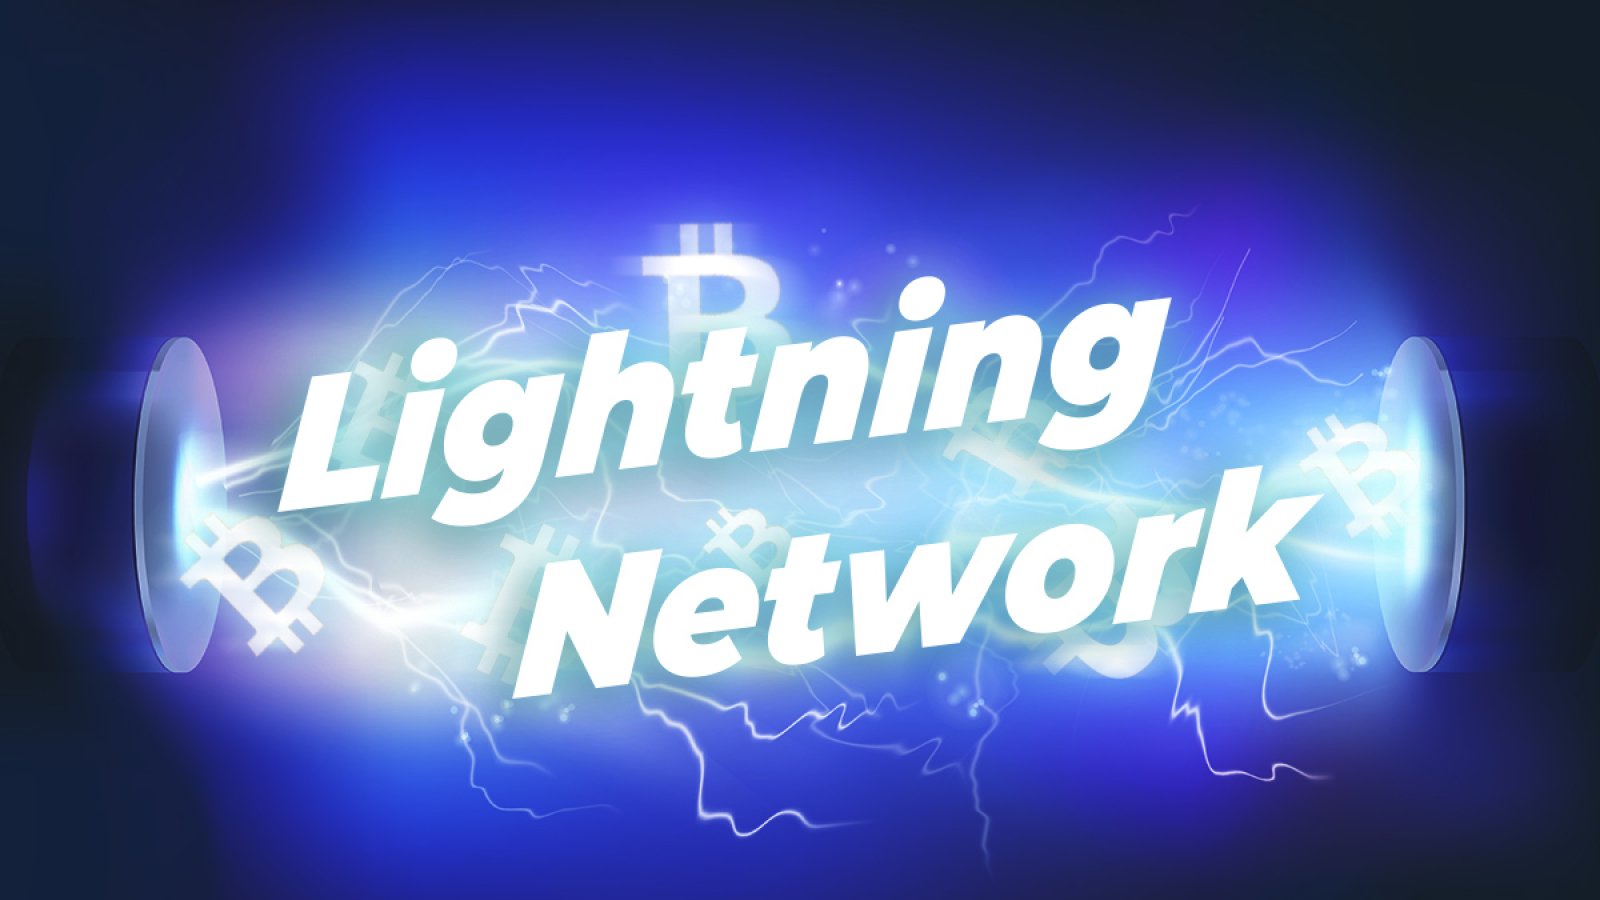 What is the Lightning Network